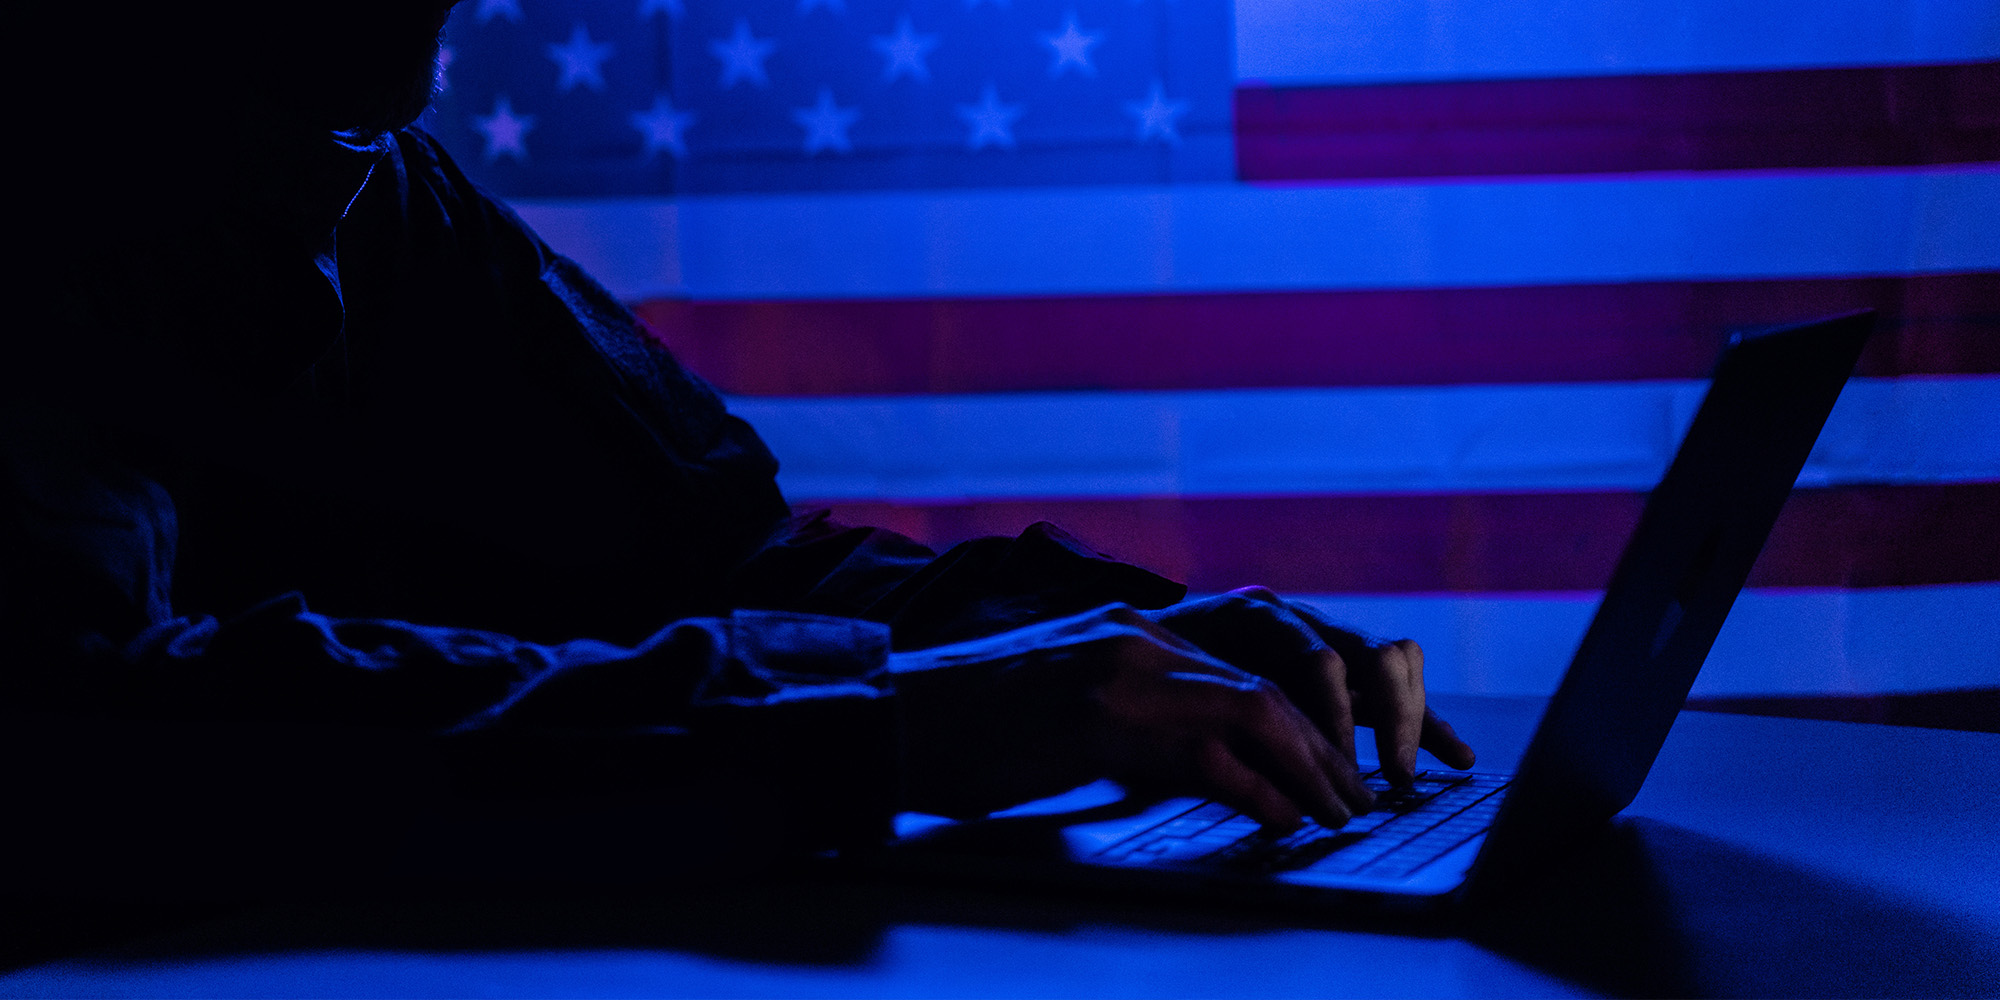 hacker-with-laptop-and-usa-flag-in-background-cyb-2022-02-28-20-06-43-utc